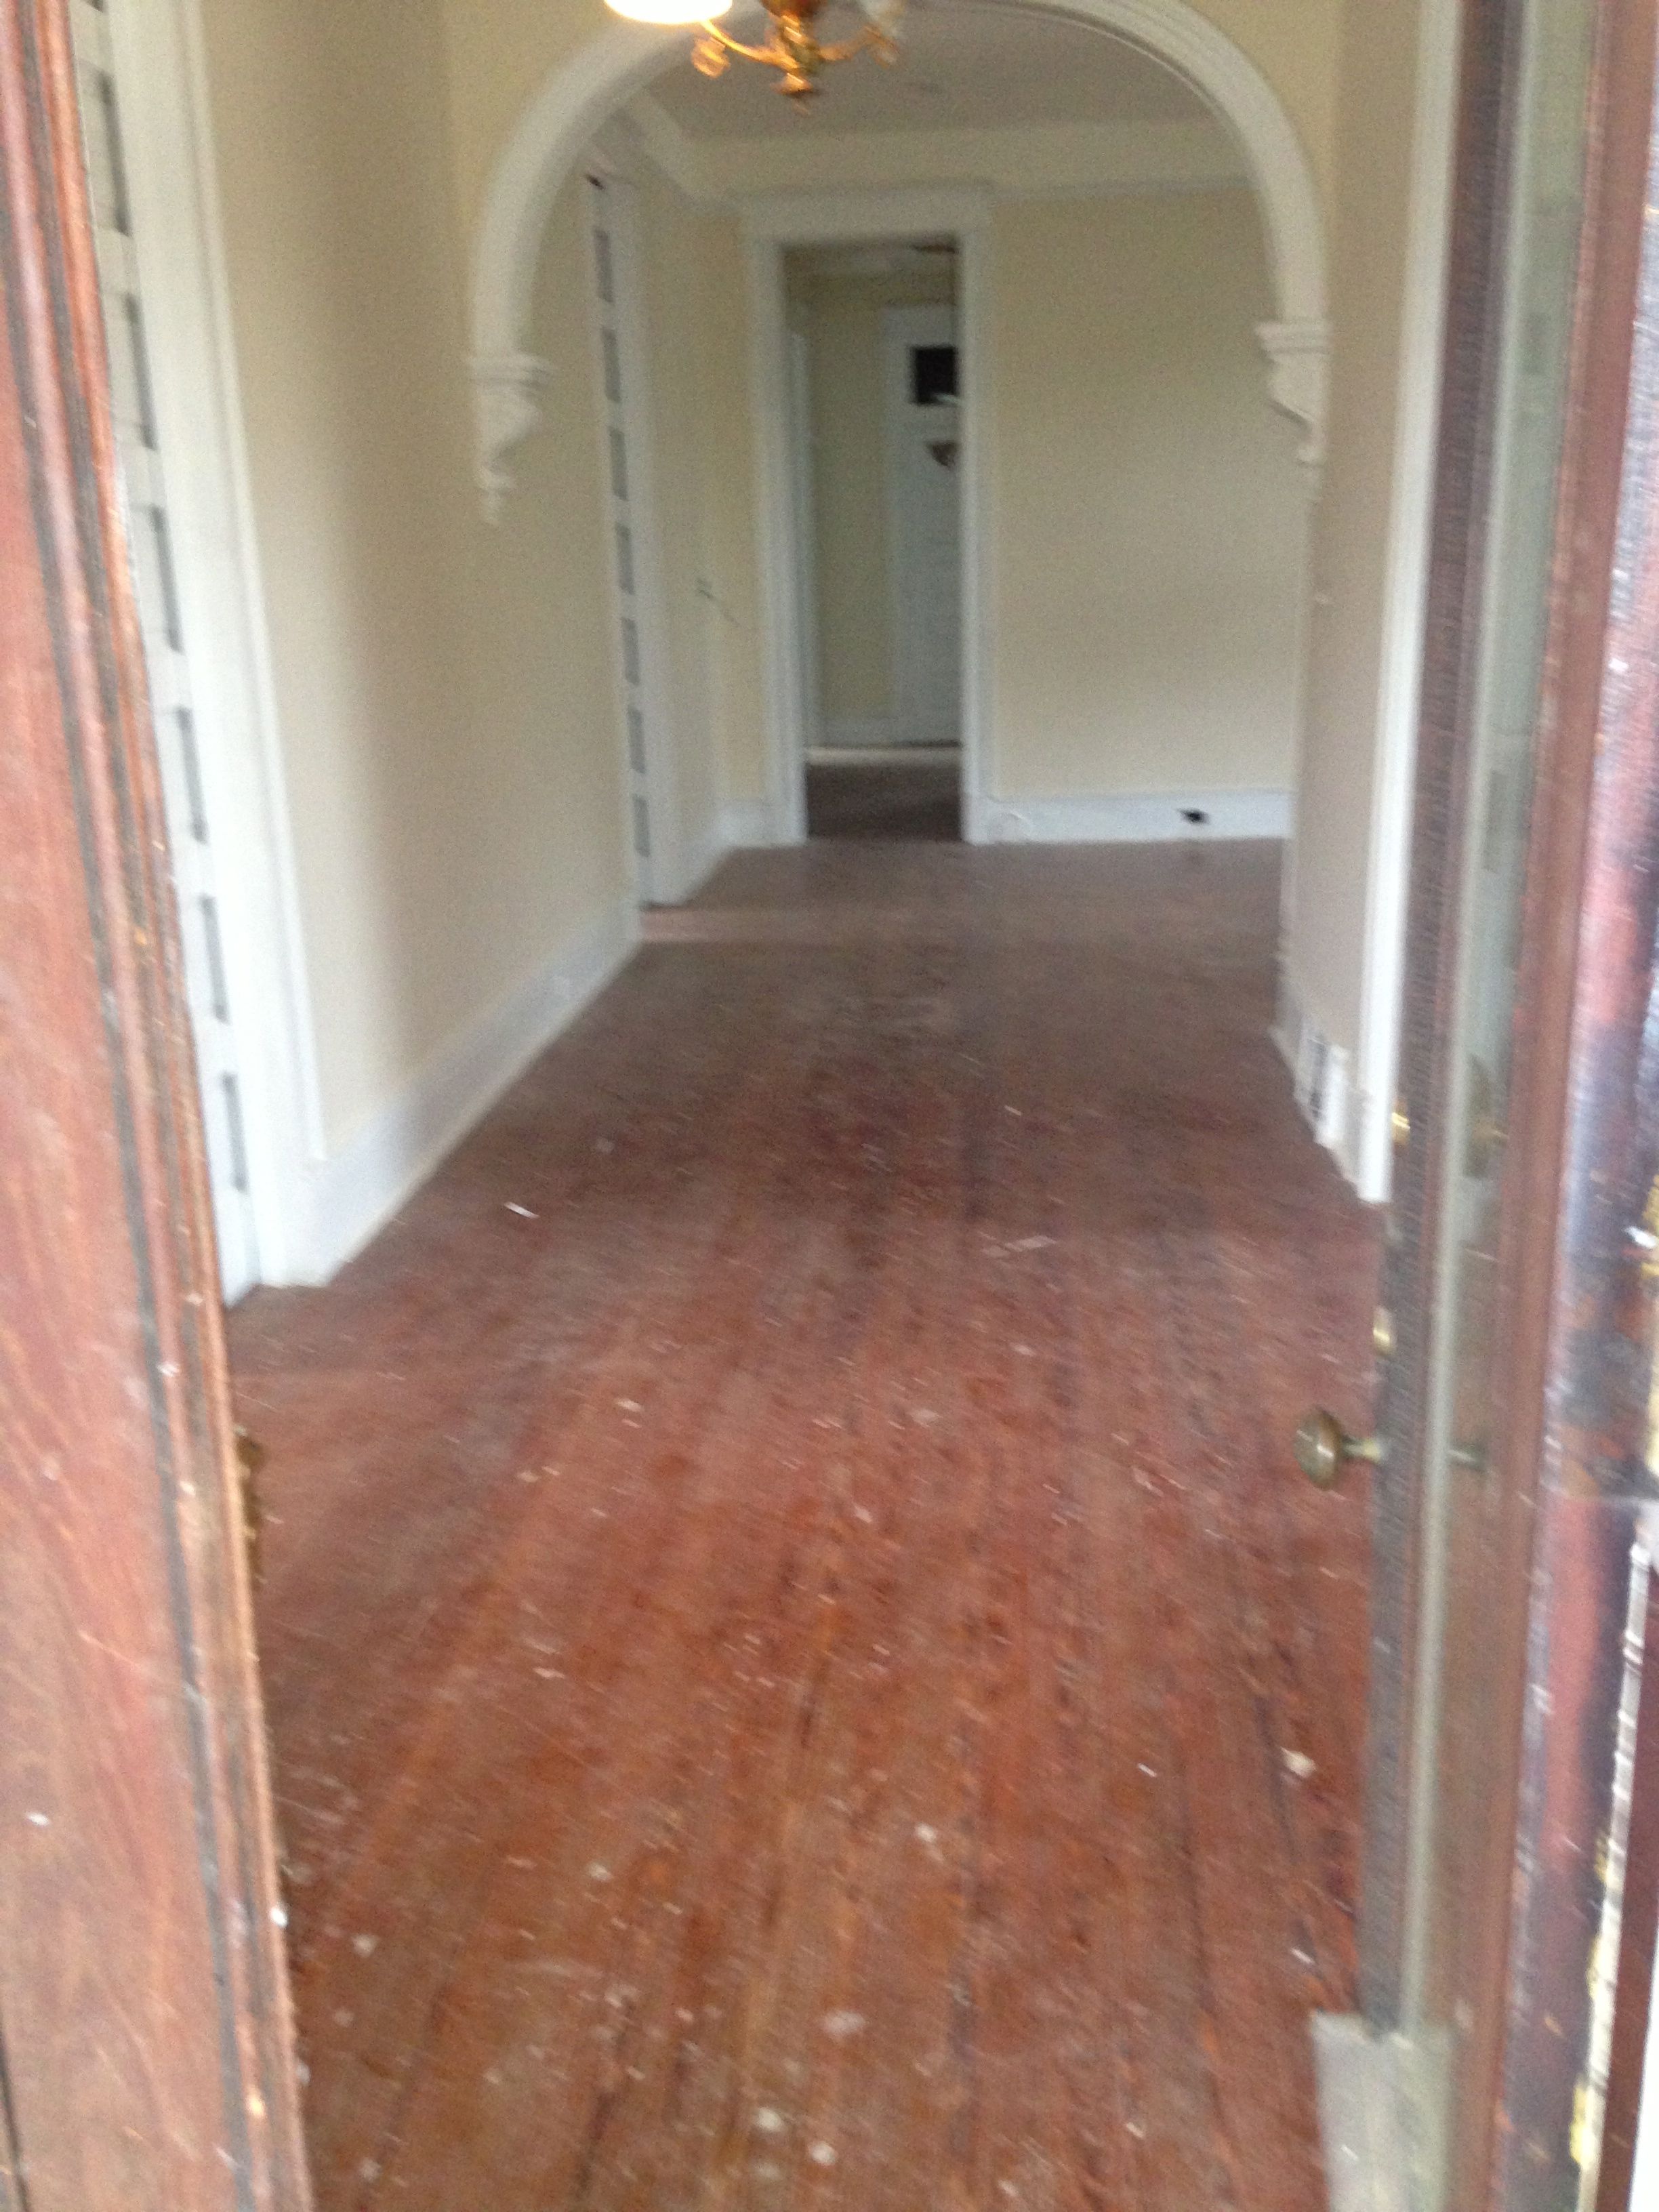 Pictured dusty and scuffed hardwood floors prior to refinishing